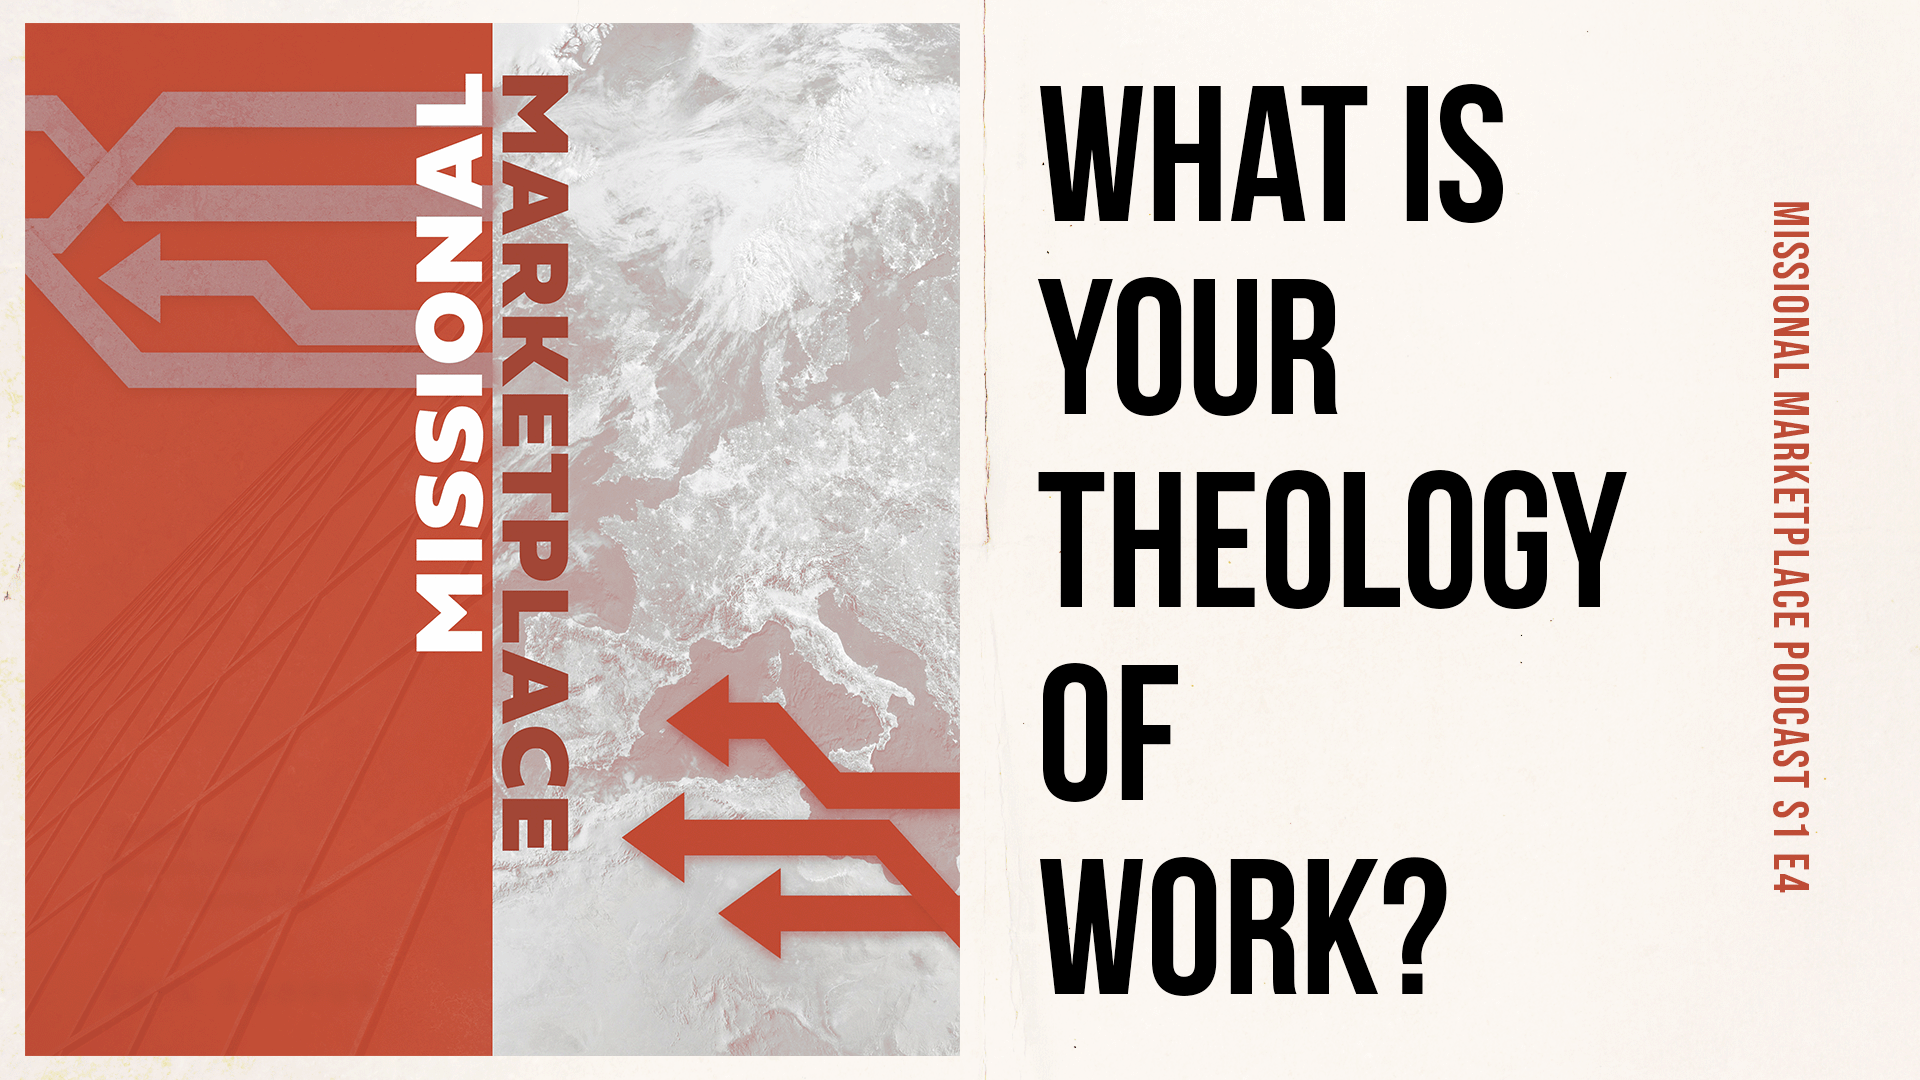 What is your work theology?